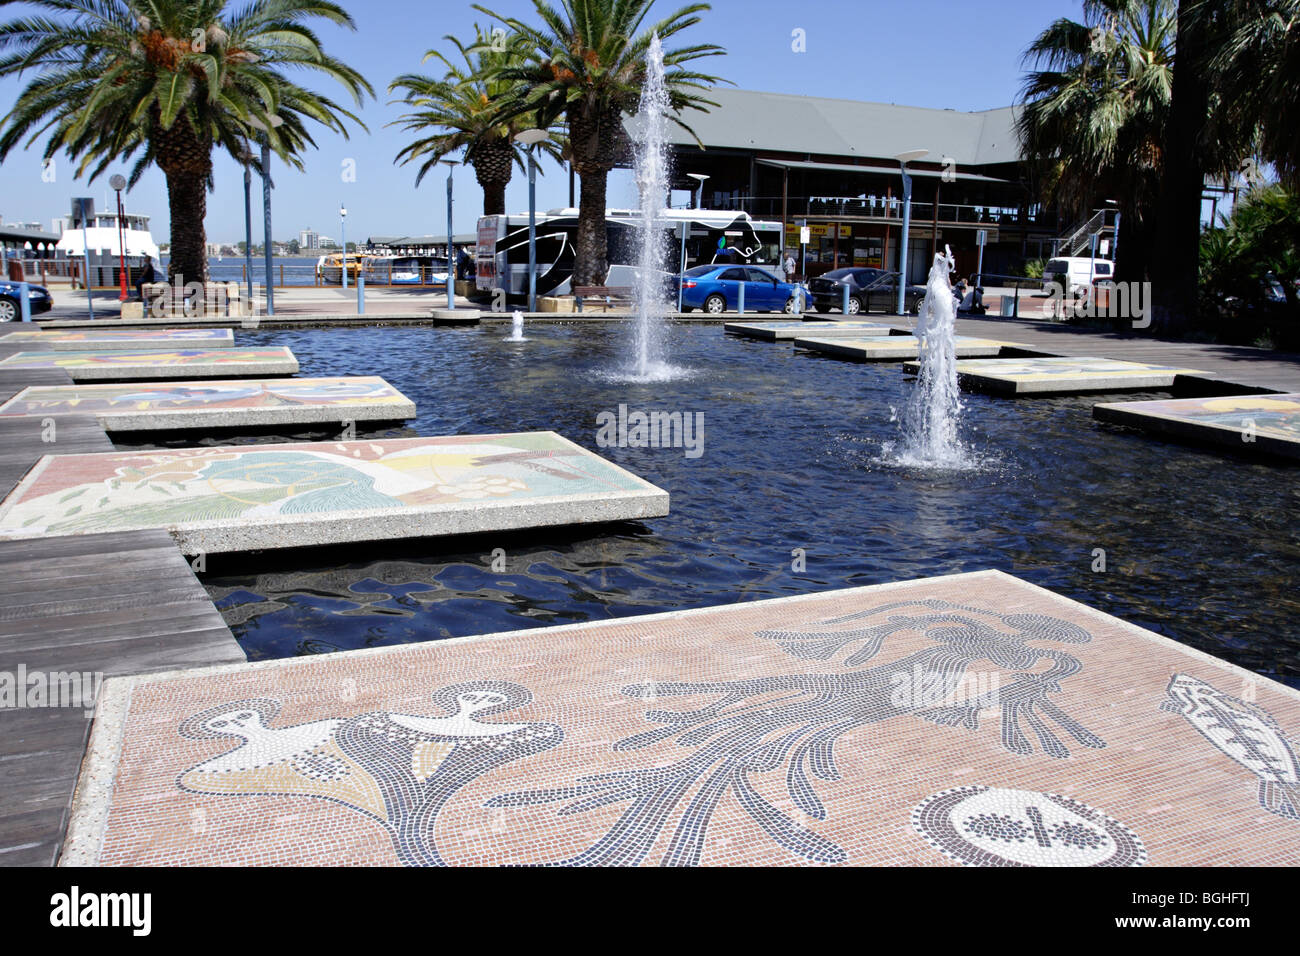 Traditional aboriginal art at Barrack Square near Swan Bell Tower in Perth, Western Australia. Stock Photo